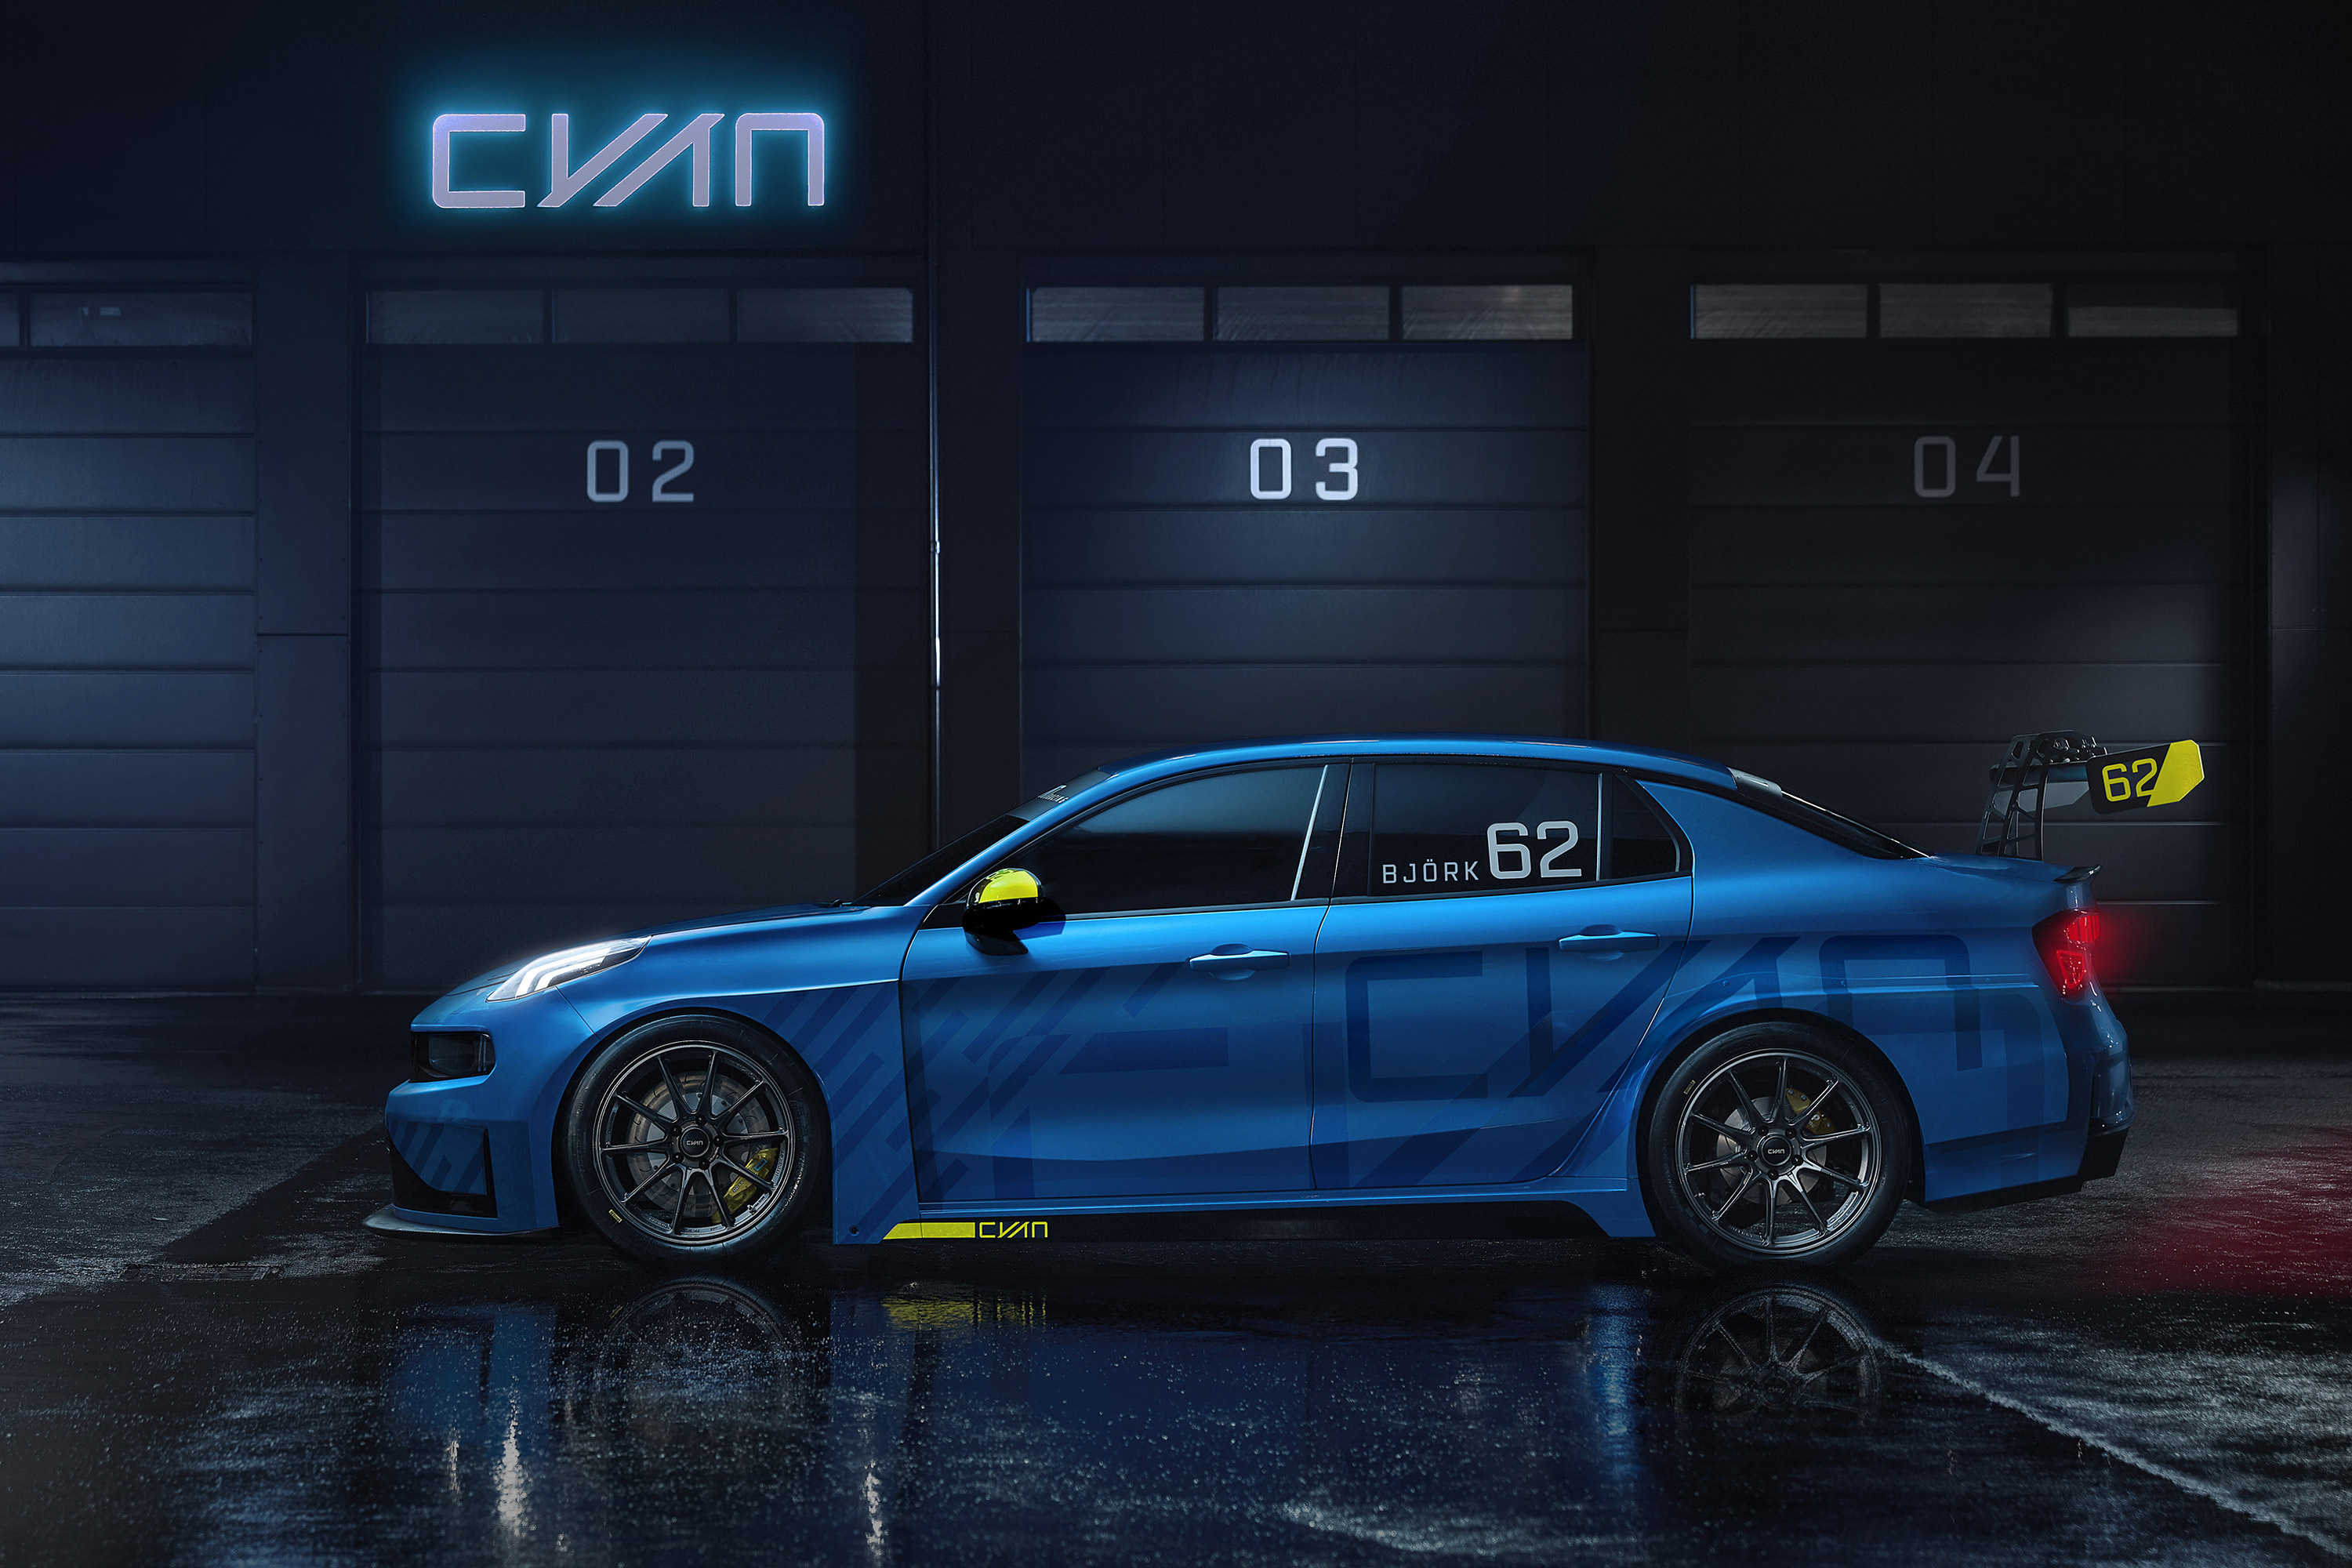 Lynk and Co, HD wallpapers, Automotive backgrounds, Stylish designs, 3000x2000 HD Desktop